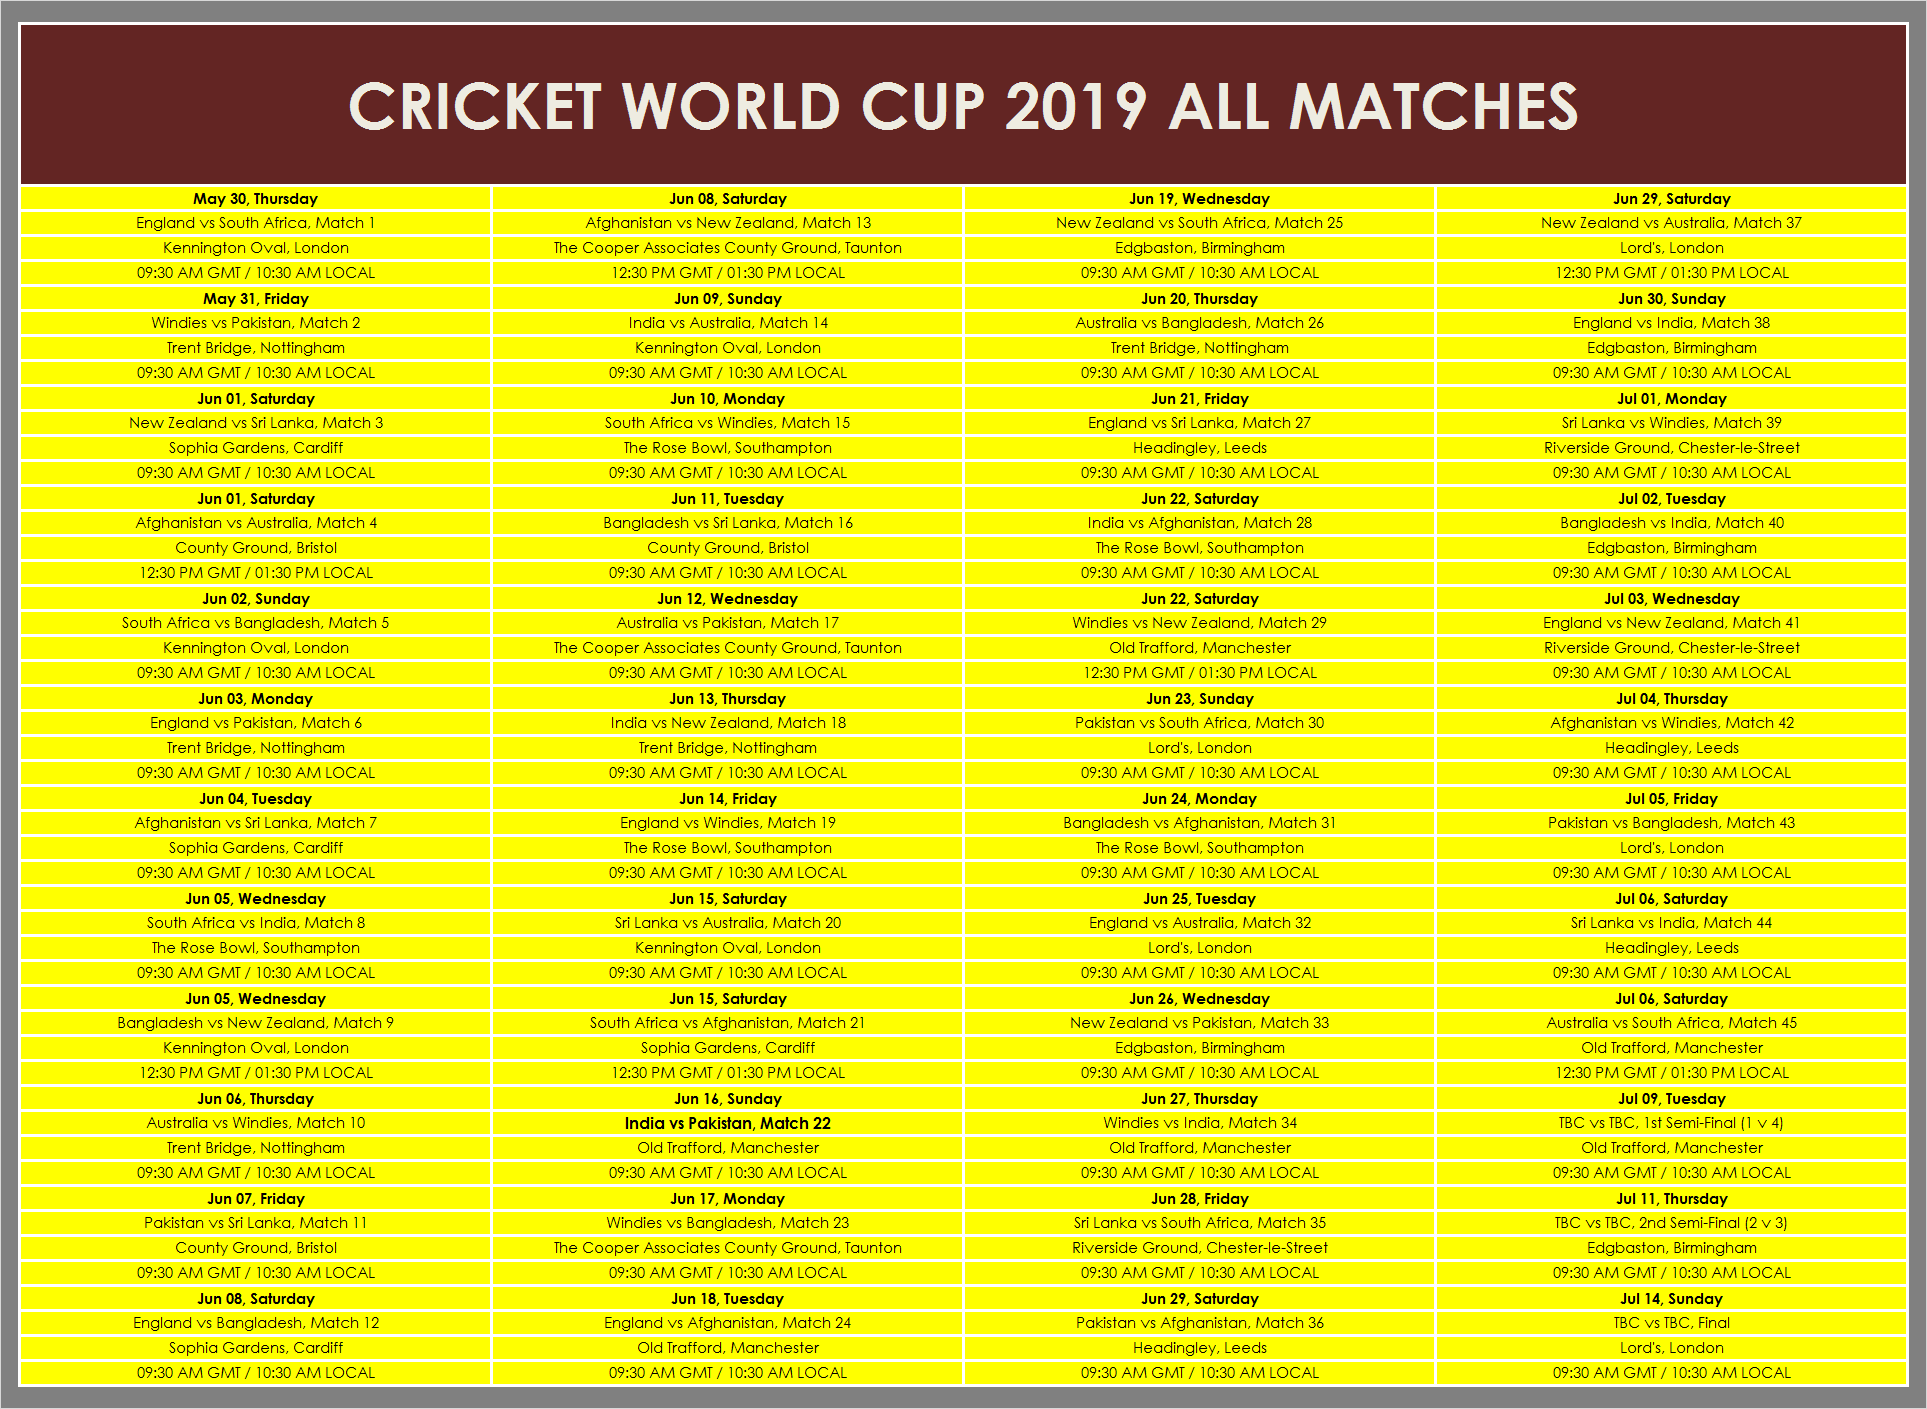 Full ICC Cricket World Cup 2019 Schedule, Fixtures, Time Table & Details